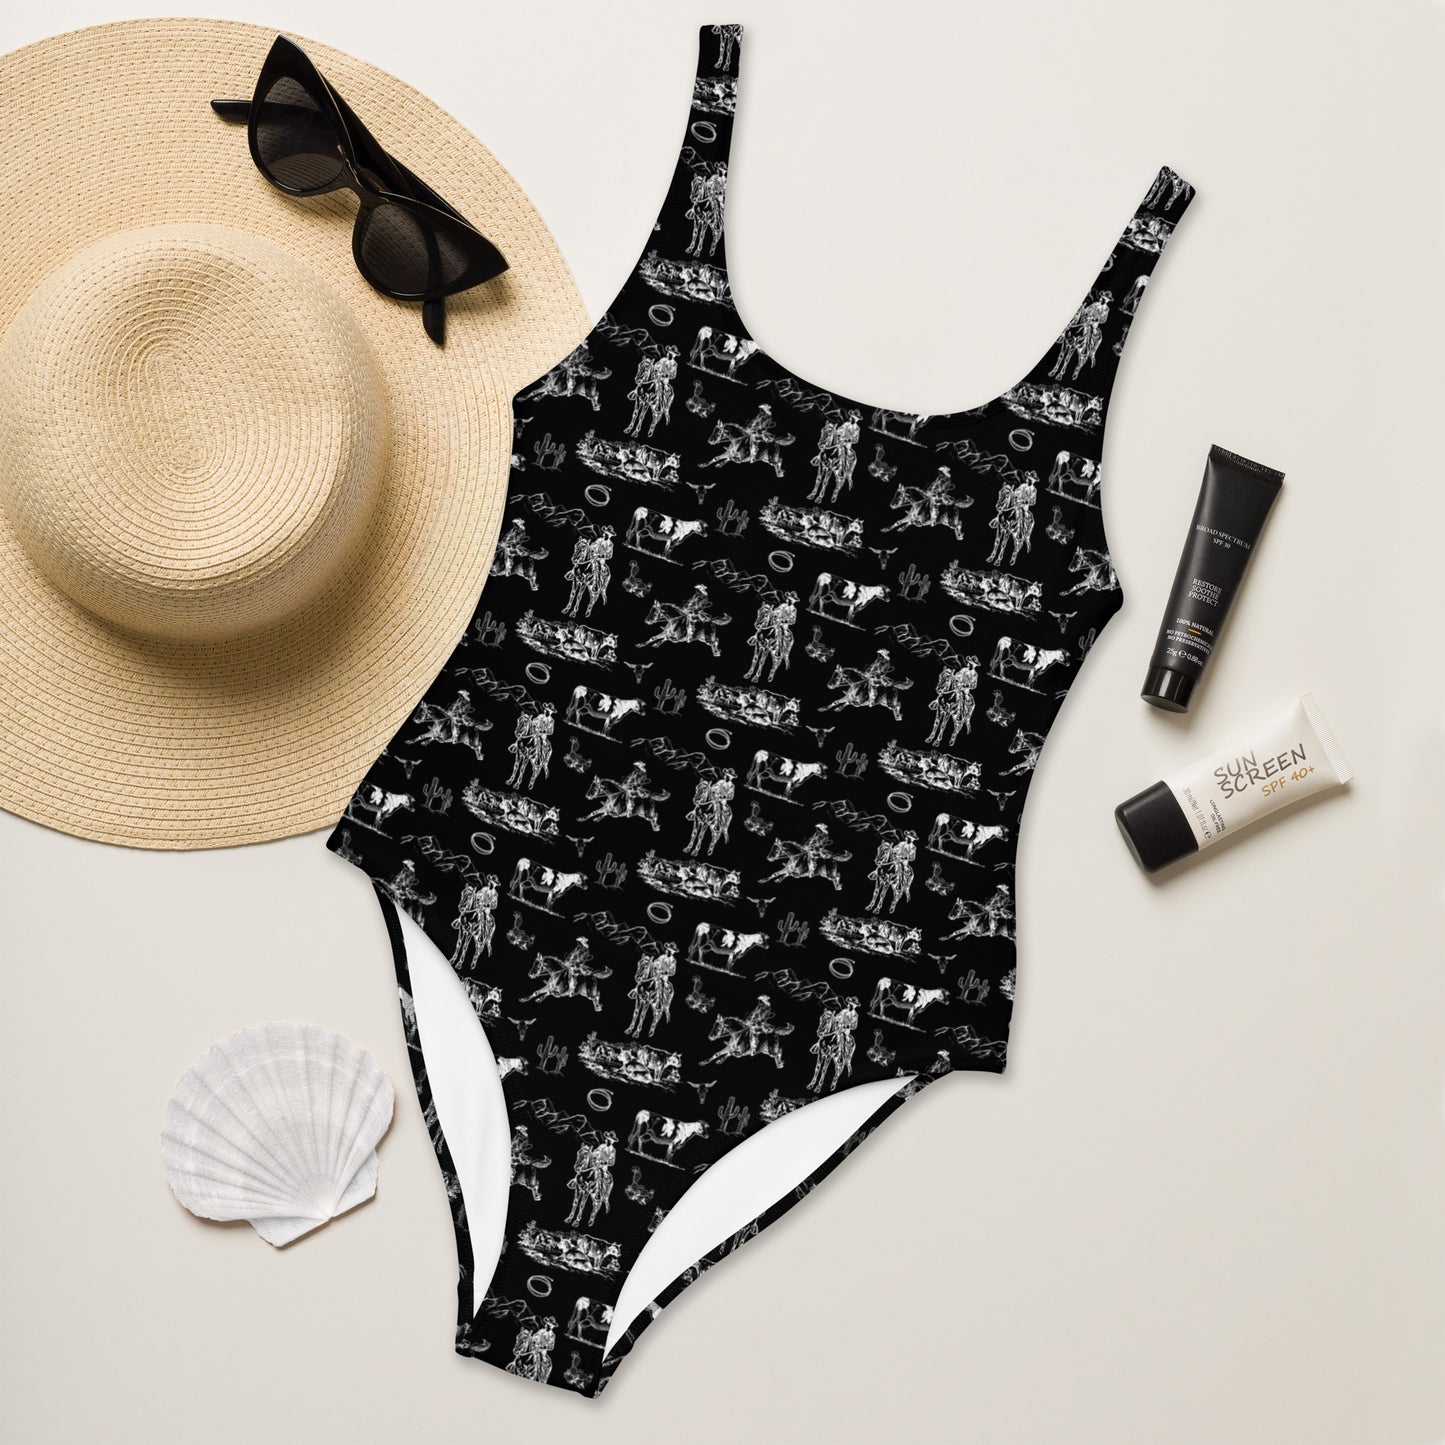 Yeehaw Ranch Way One-Piece Swimsuit